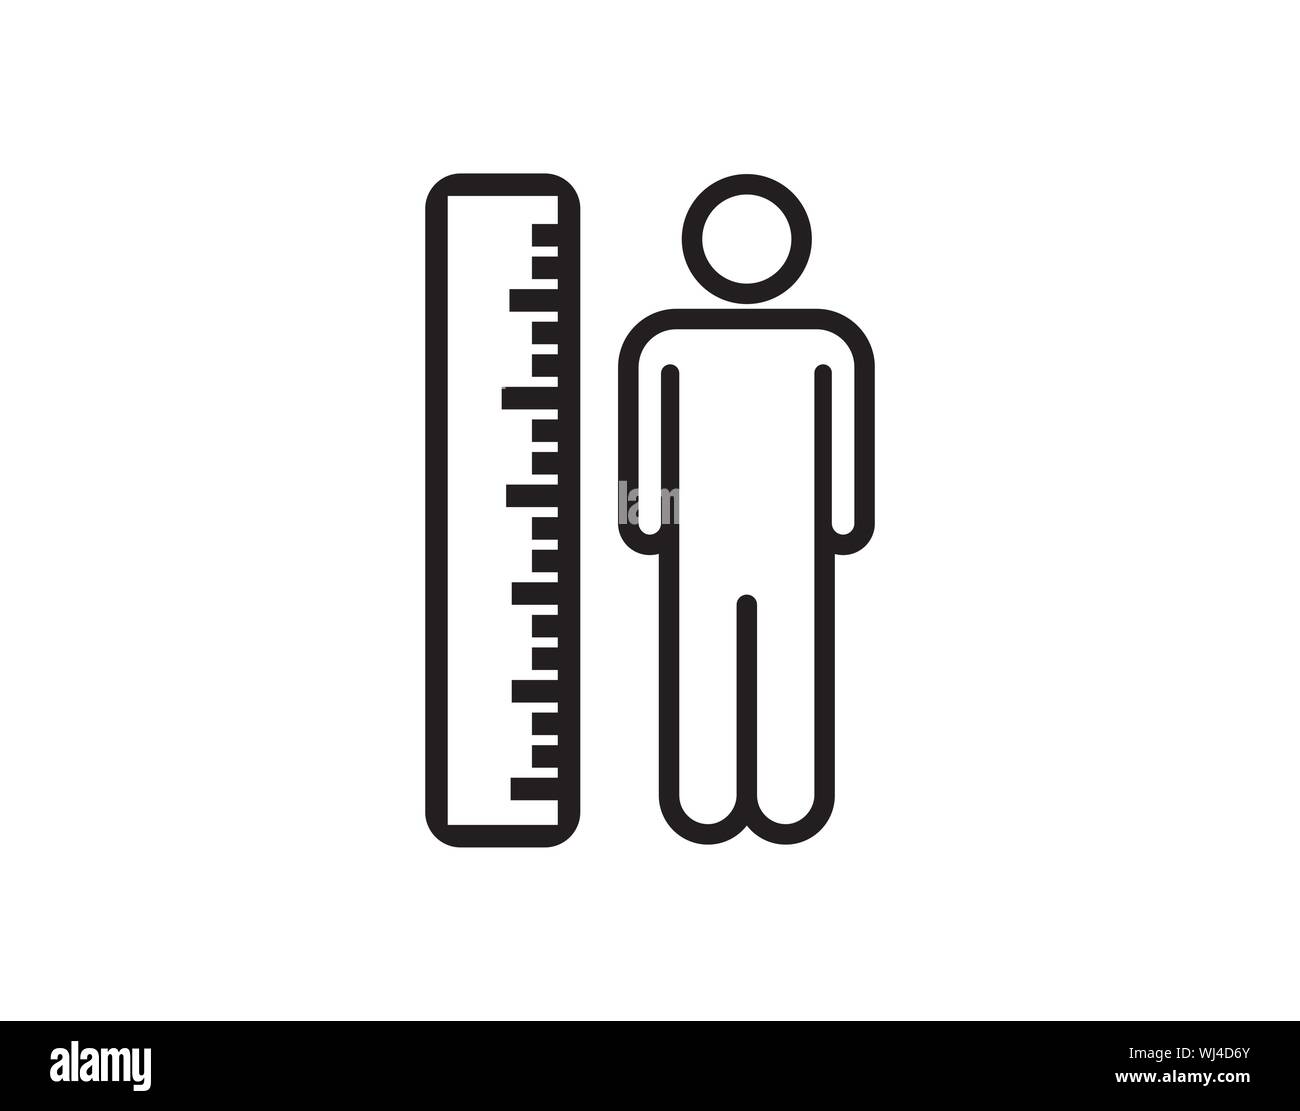 Measuring height body icon on white background vector image Stock Vector